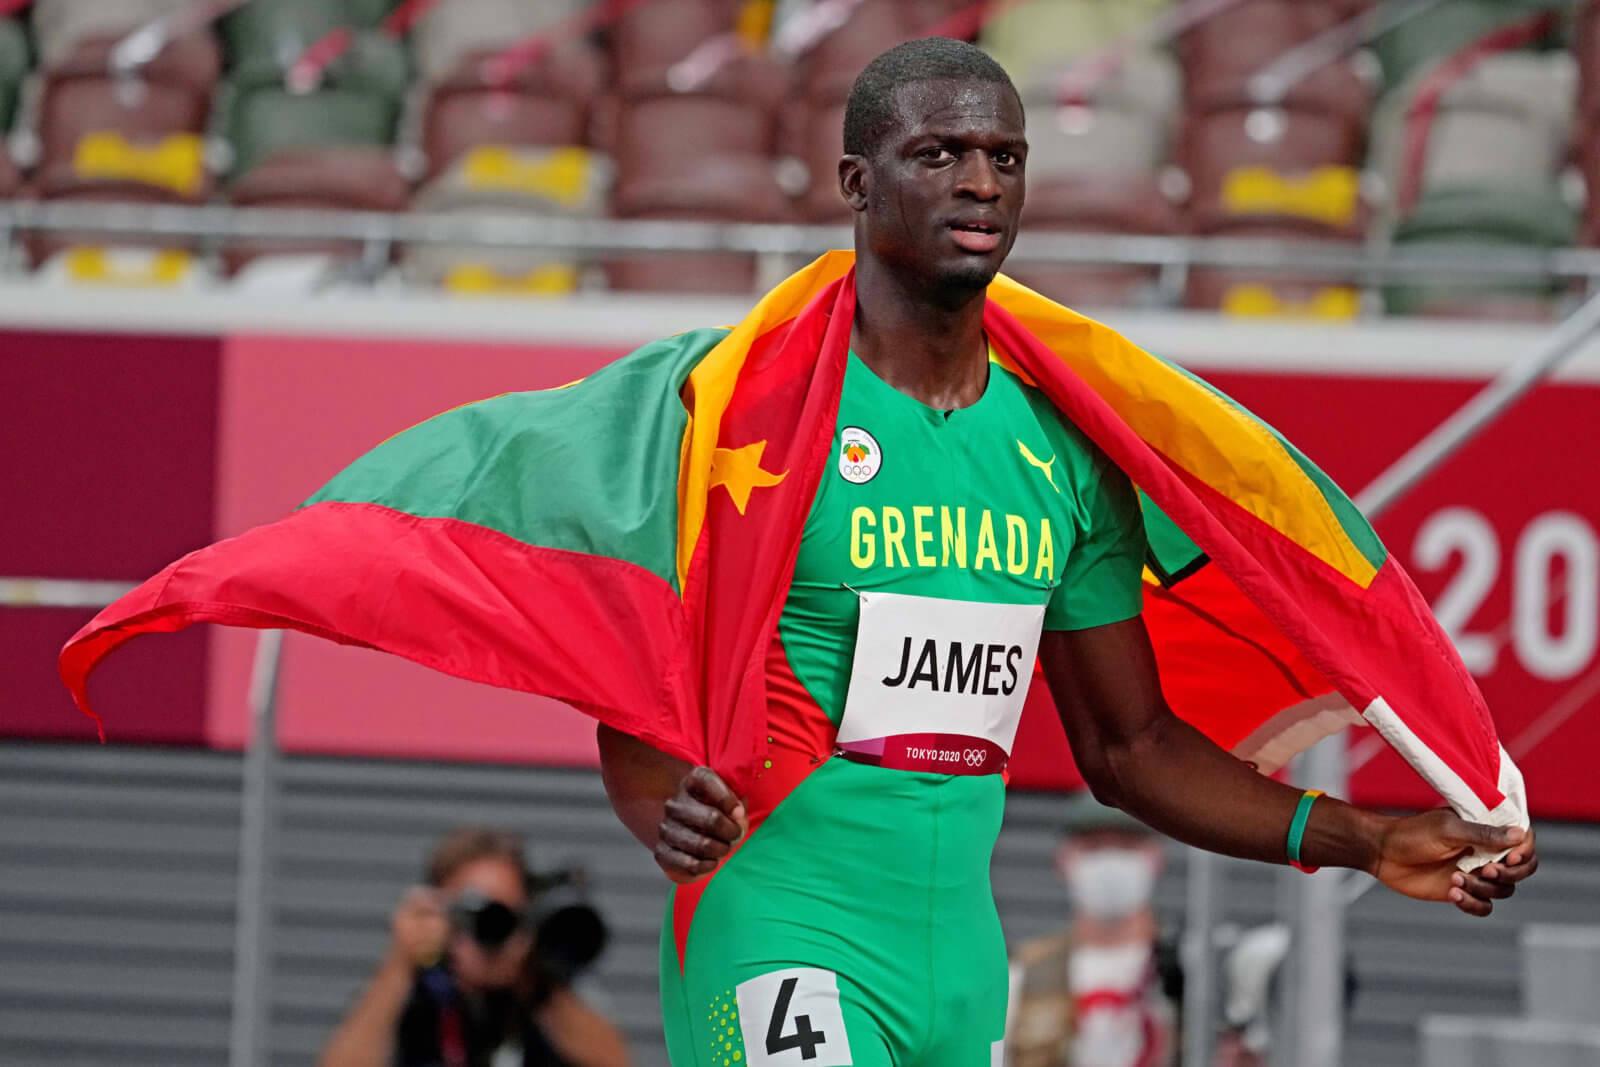 Grenada's Kirani James celebrates winning the bronze medal in the men's 400m final during the Tokyo 2020 Olympic Summer Games at Olympic Stadium on Thursday, Aug. 5, 2021 in Tokyo, Japan. Mandatory Credit: Kirby Lee-USA TODAY Sports Caribbeanlifenews.com